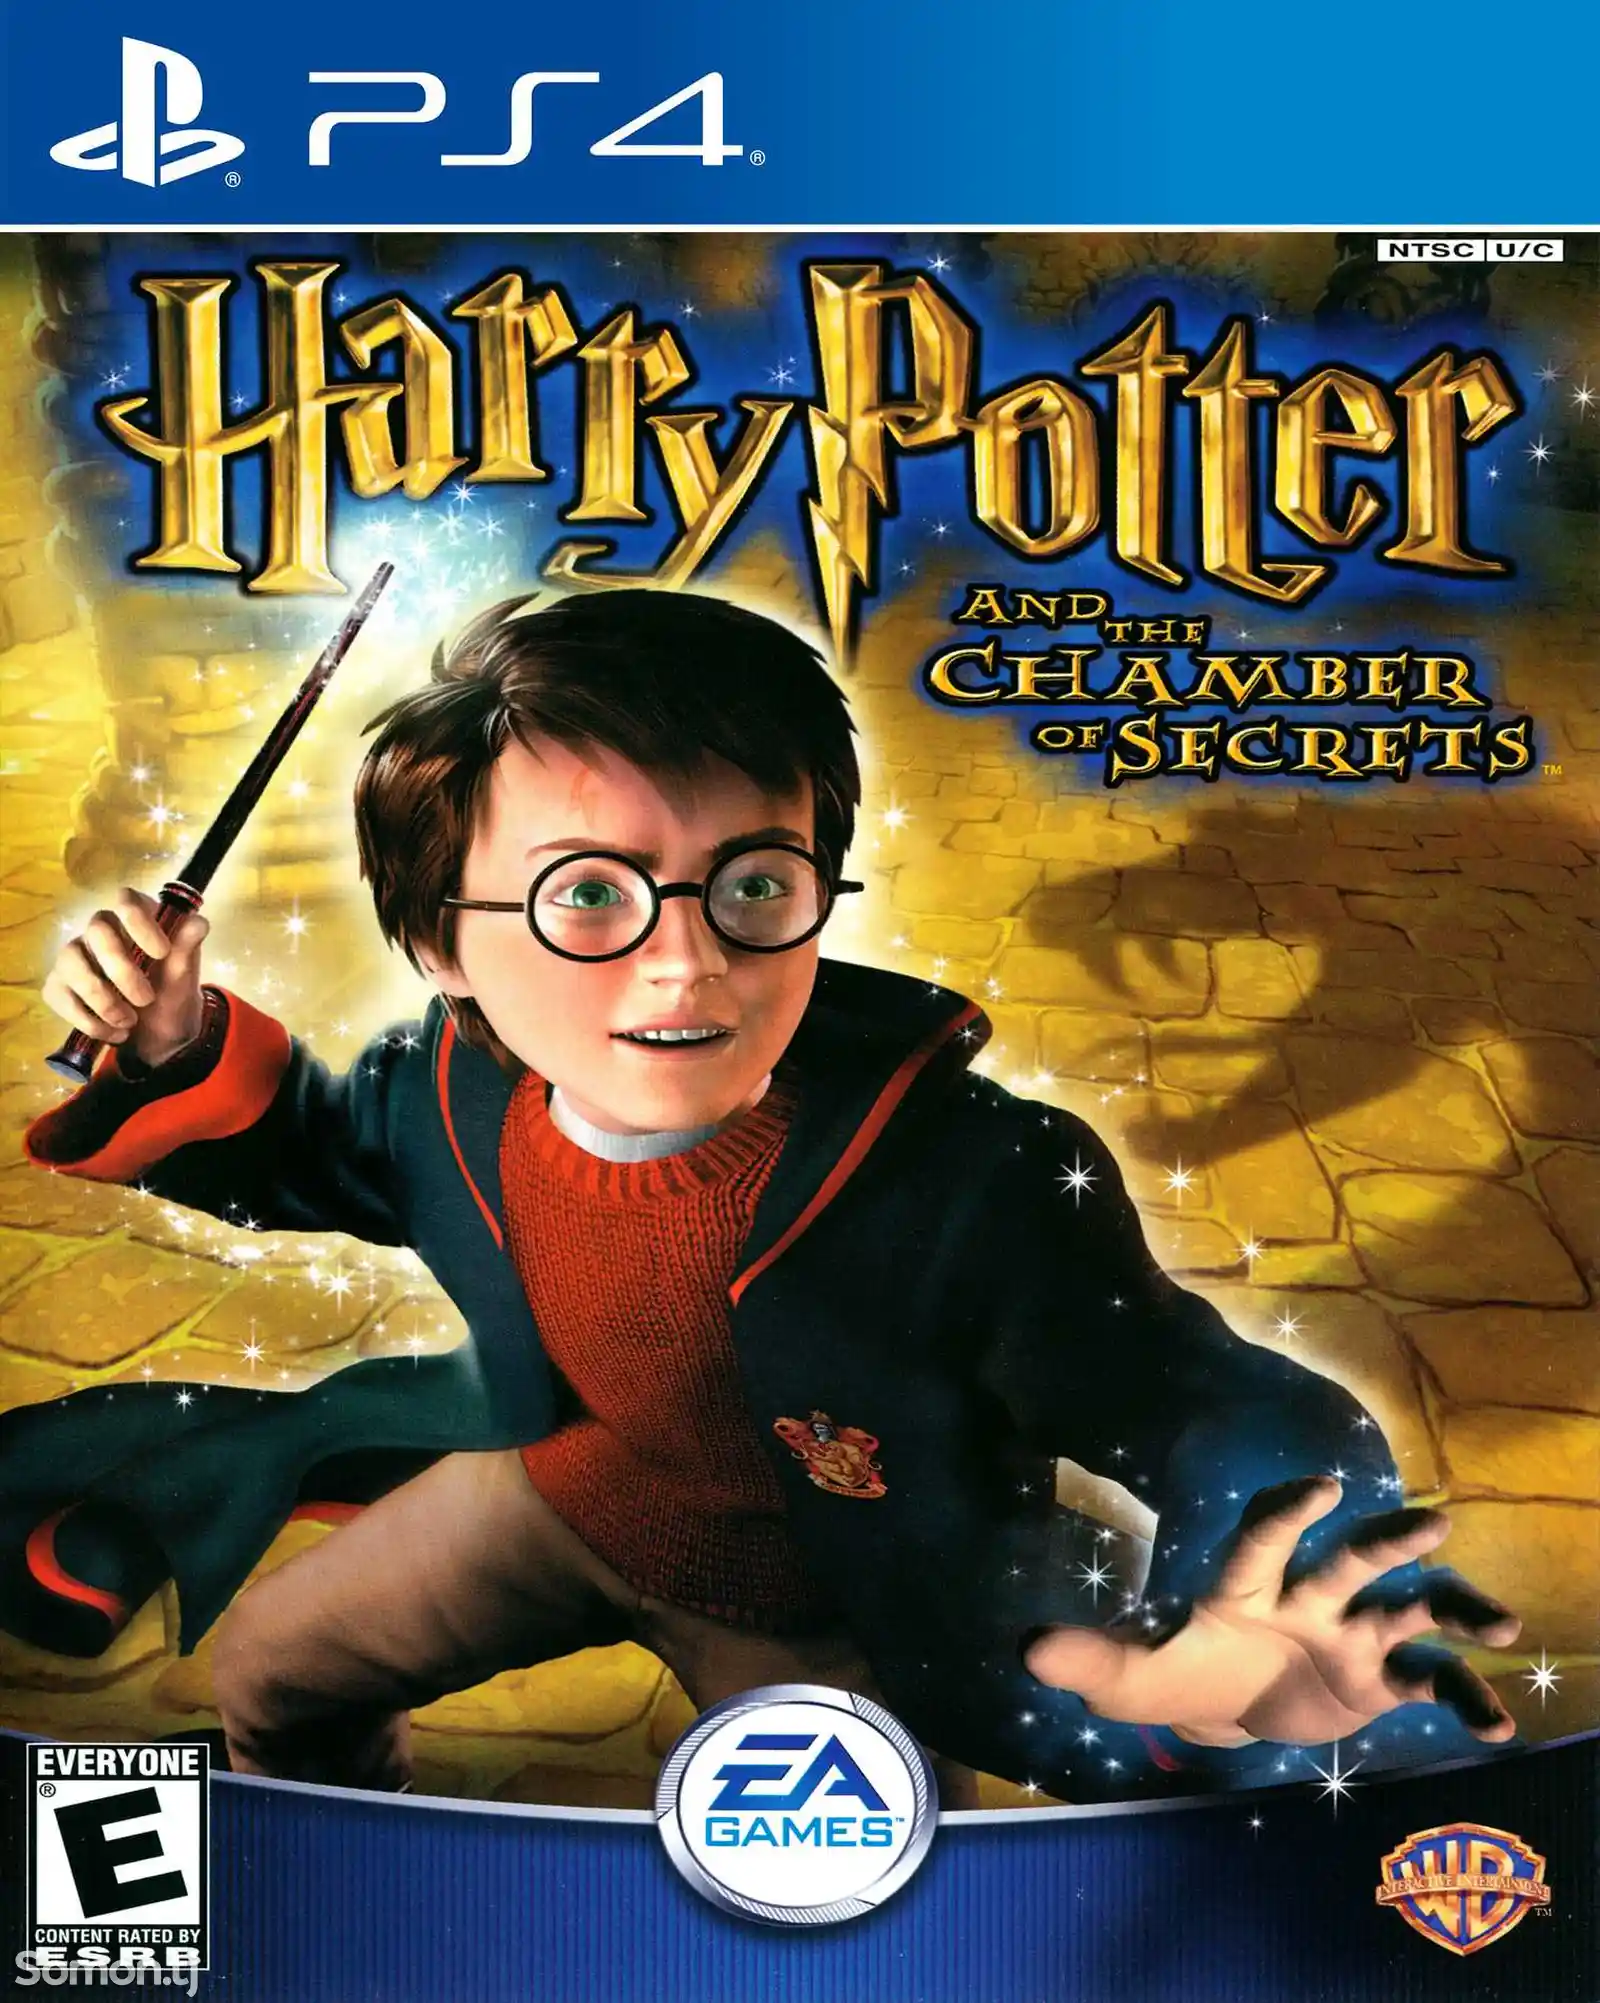 Игра Harry potter and the chamber of secrets для PS-4 / 5.05 / 6.72 / 9.00 /-1